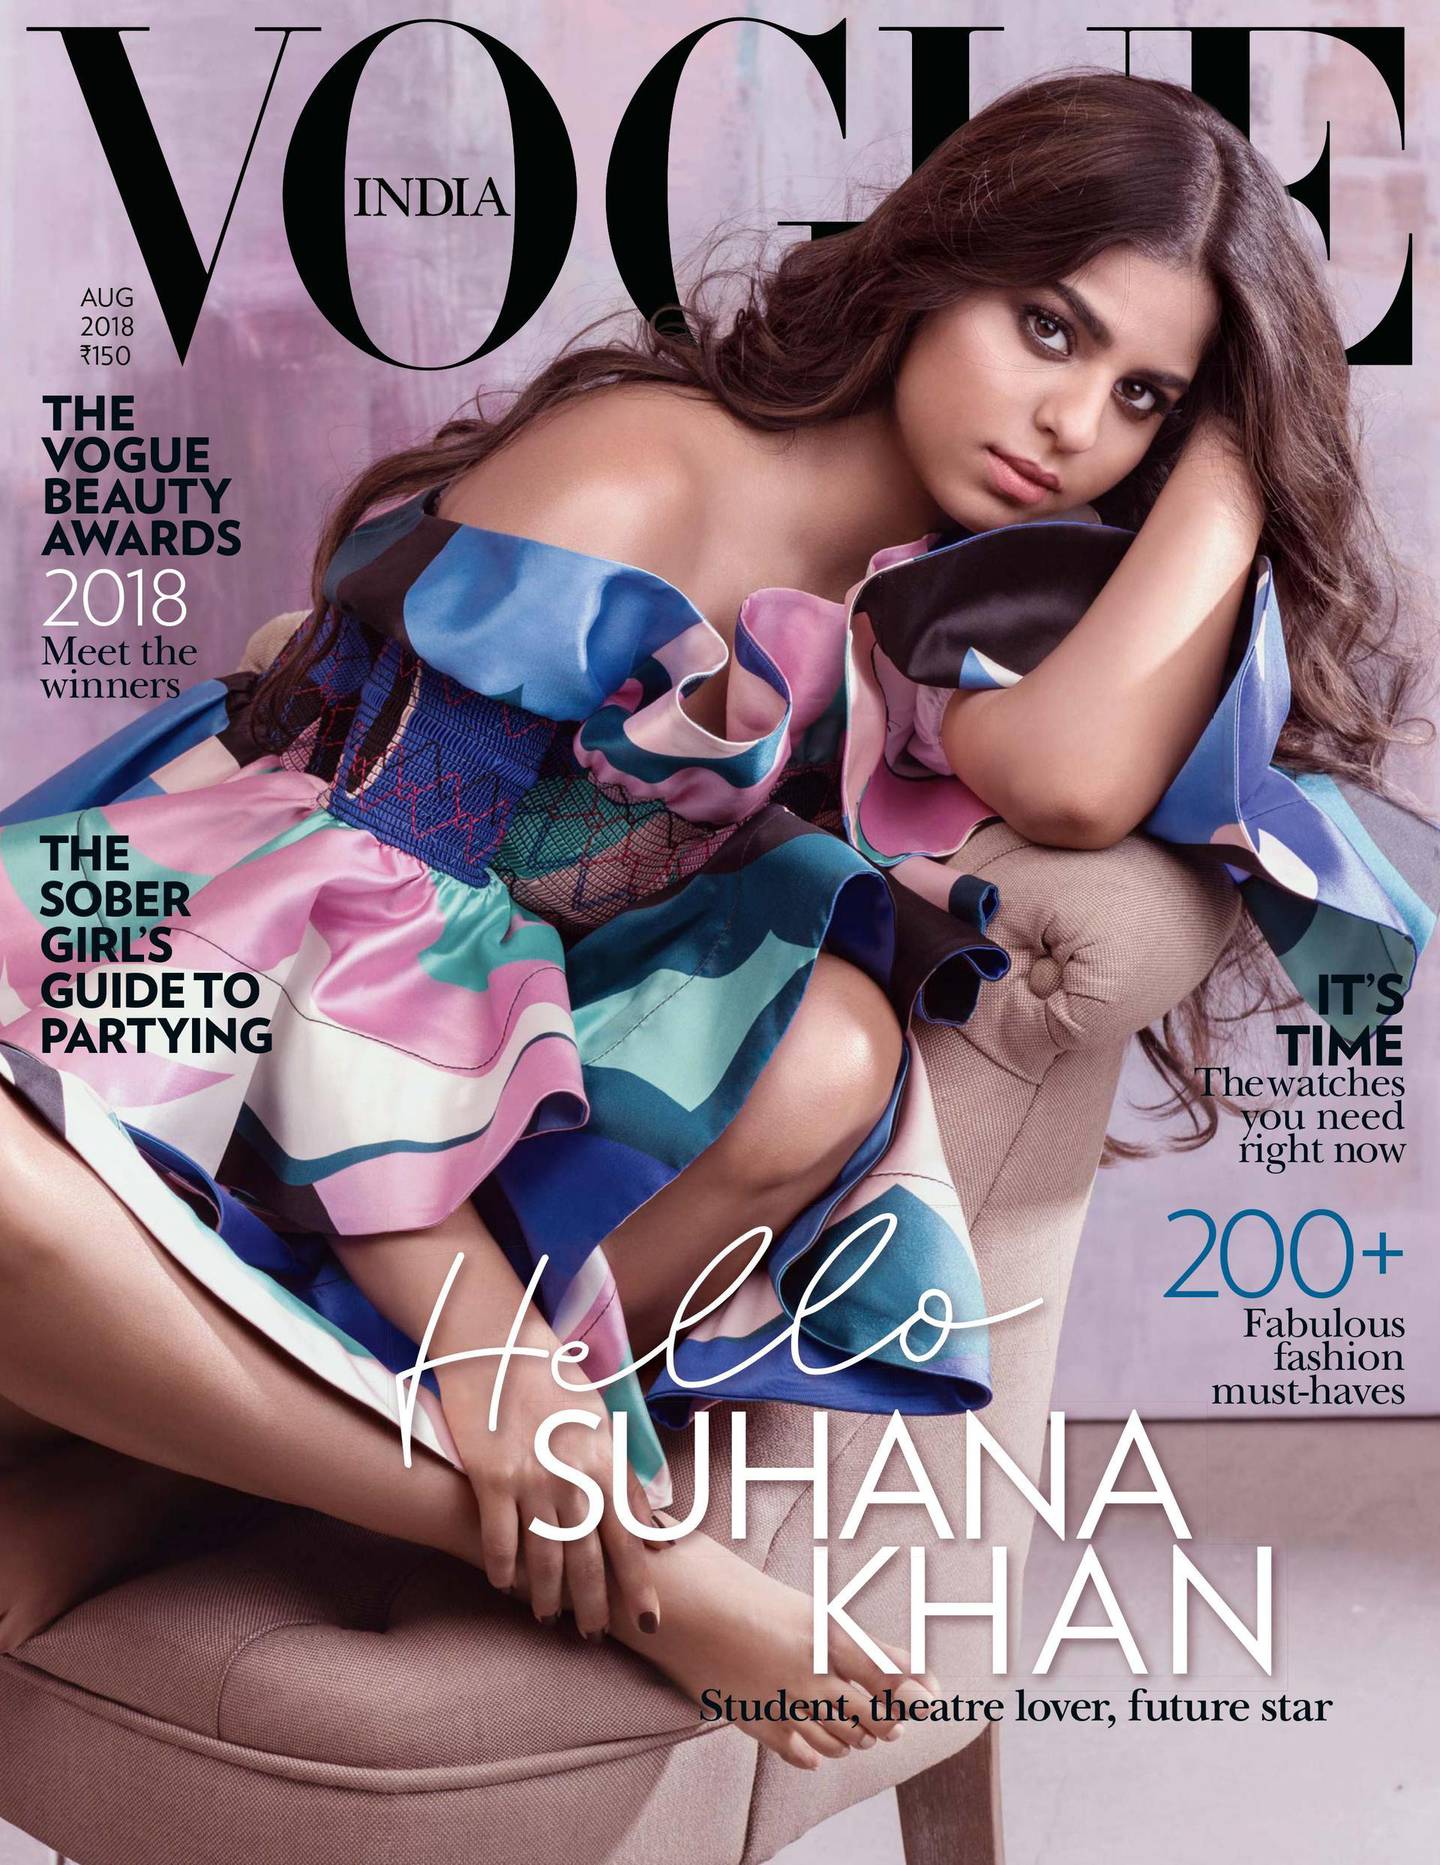 Suhana Khan on the cover of Vogue India, August 2018. Courtesy Vogue India